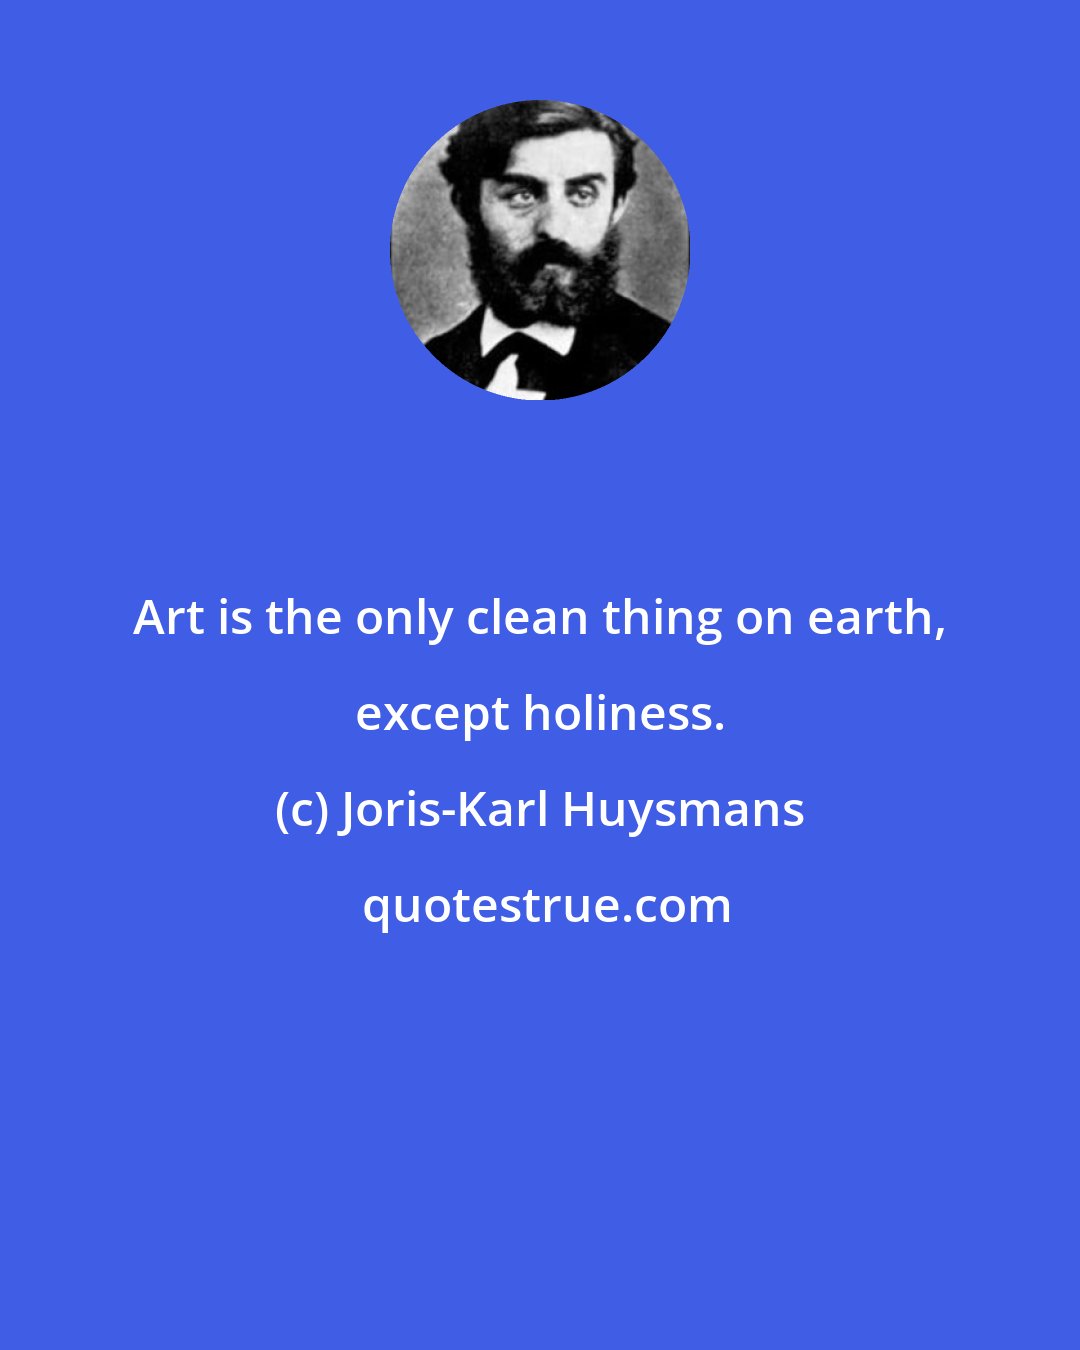 Joris-Karl Huysmans: Art is the only clean thing on earth, except holiness.